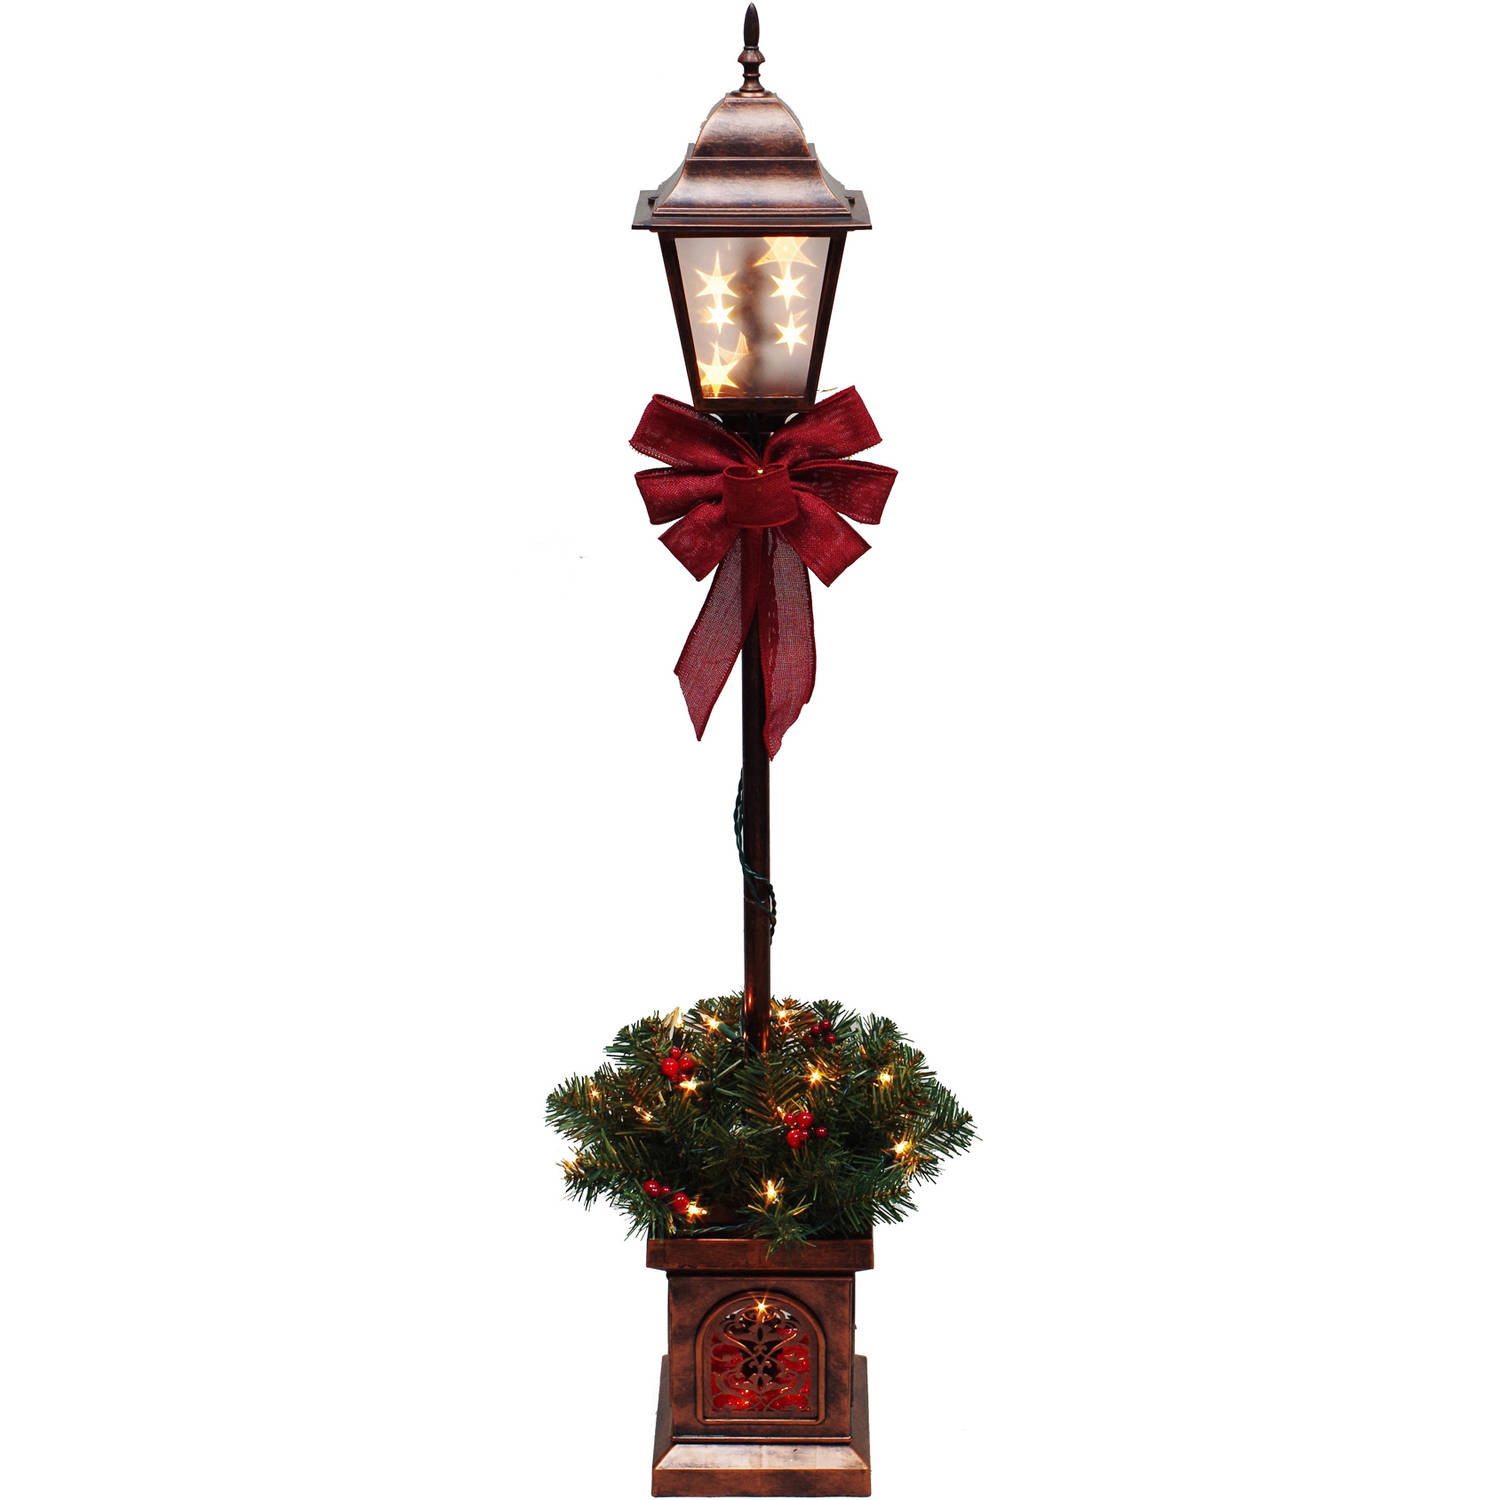 Lighted Outdoor Christmas Lamp Post
 Holiday Time Pre Lit 9 Brinkley Christmas Tree Green